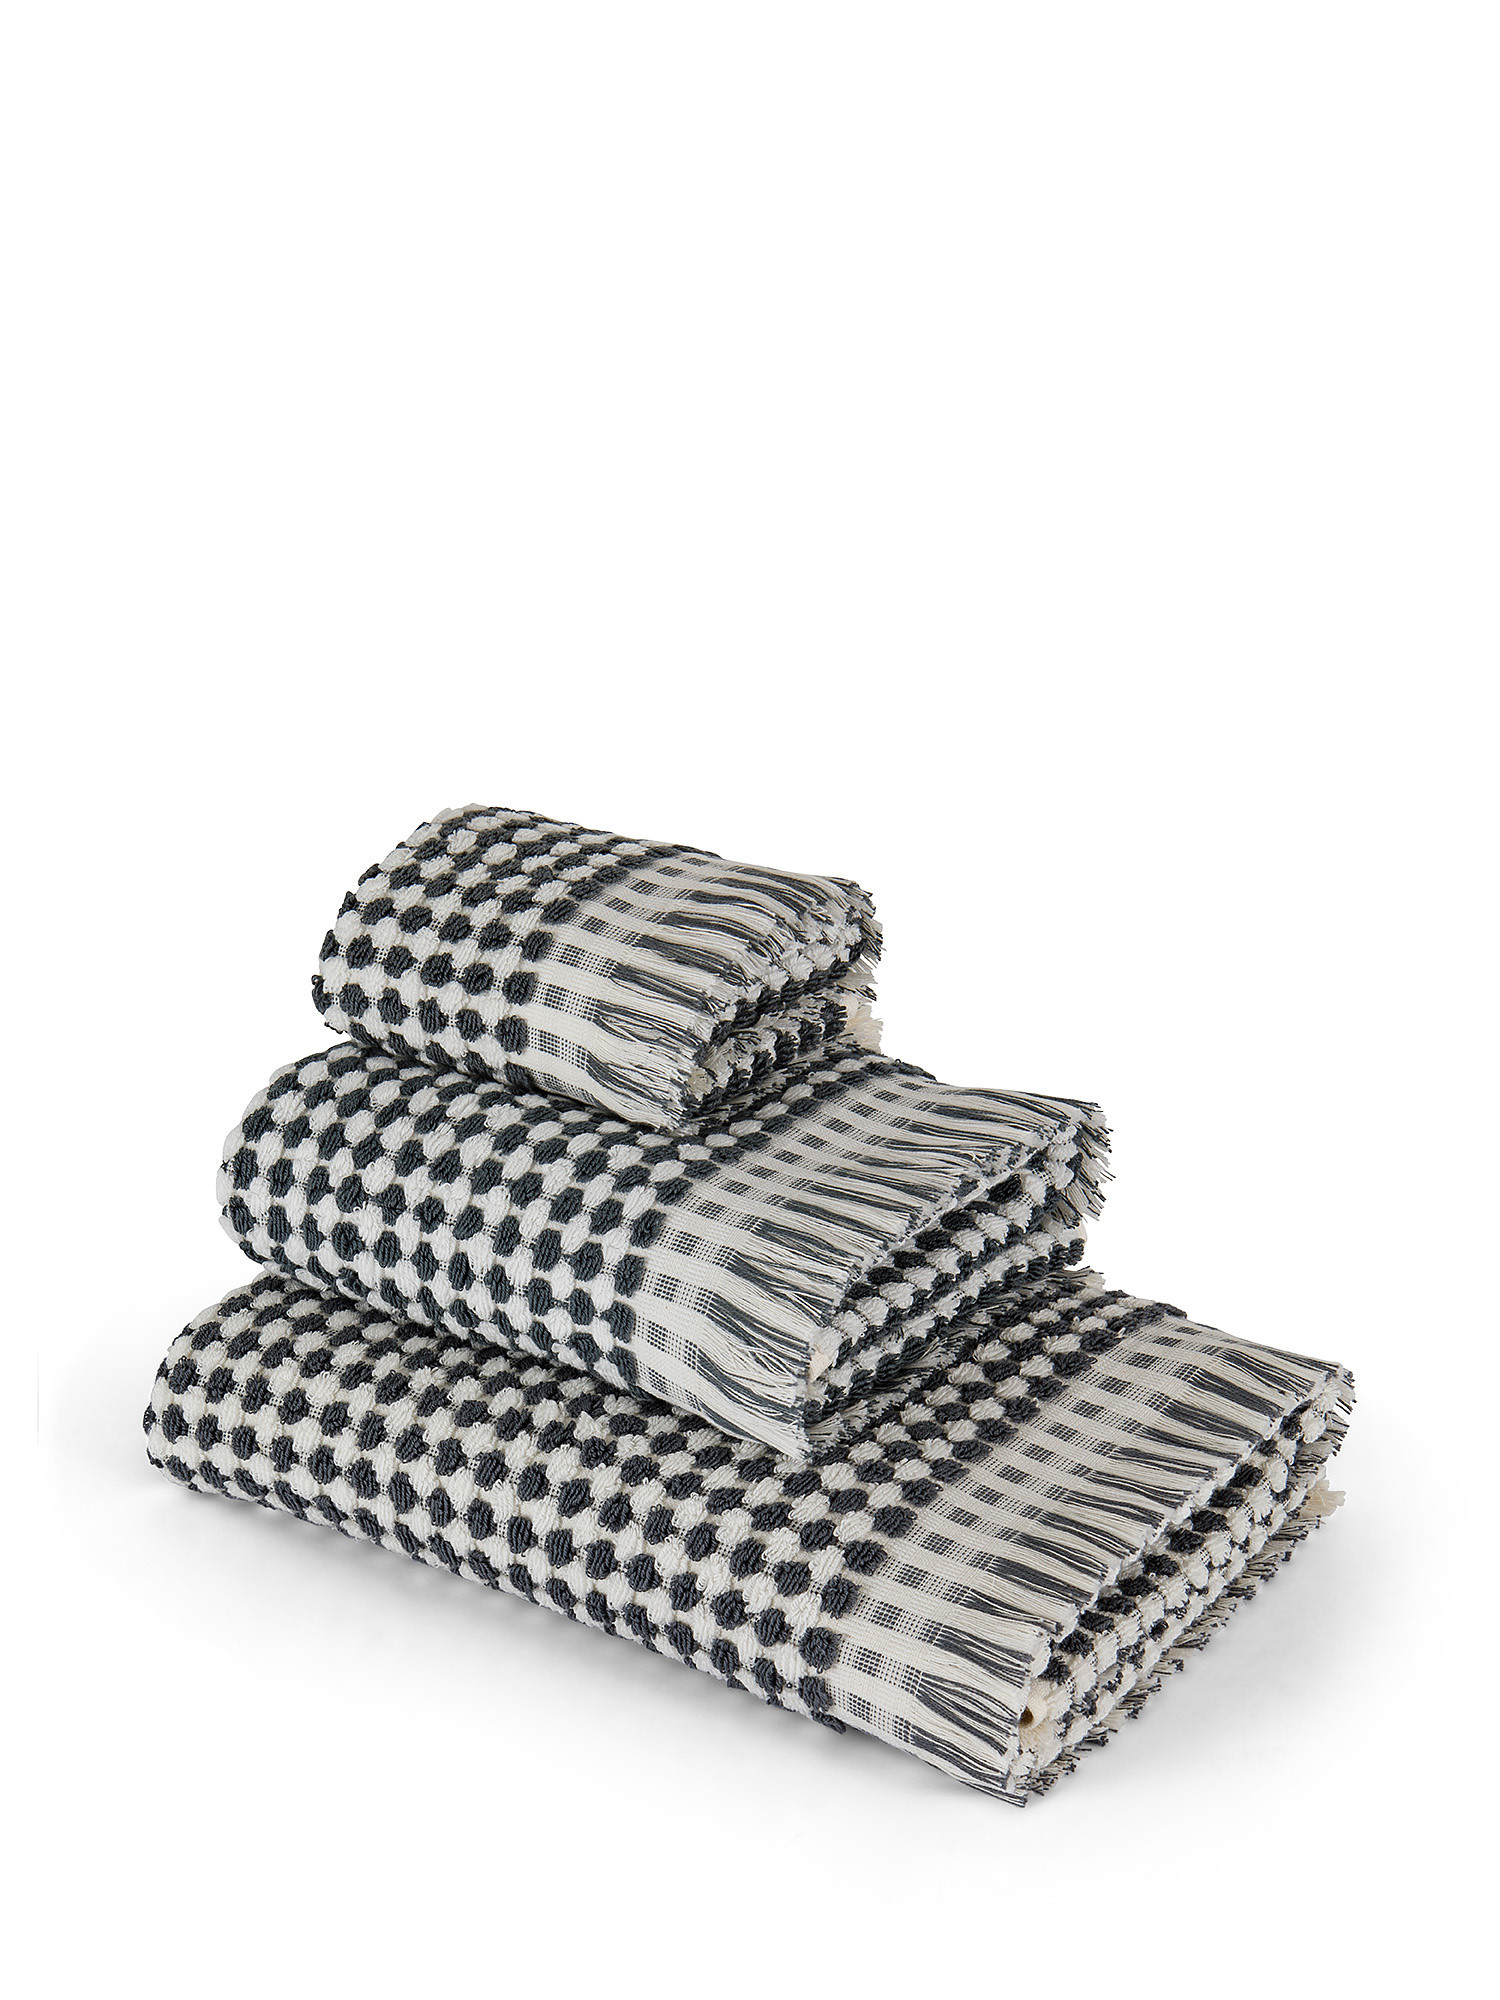 Thermae check weave towel in 100% cotton terry, White Black, large image number 0